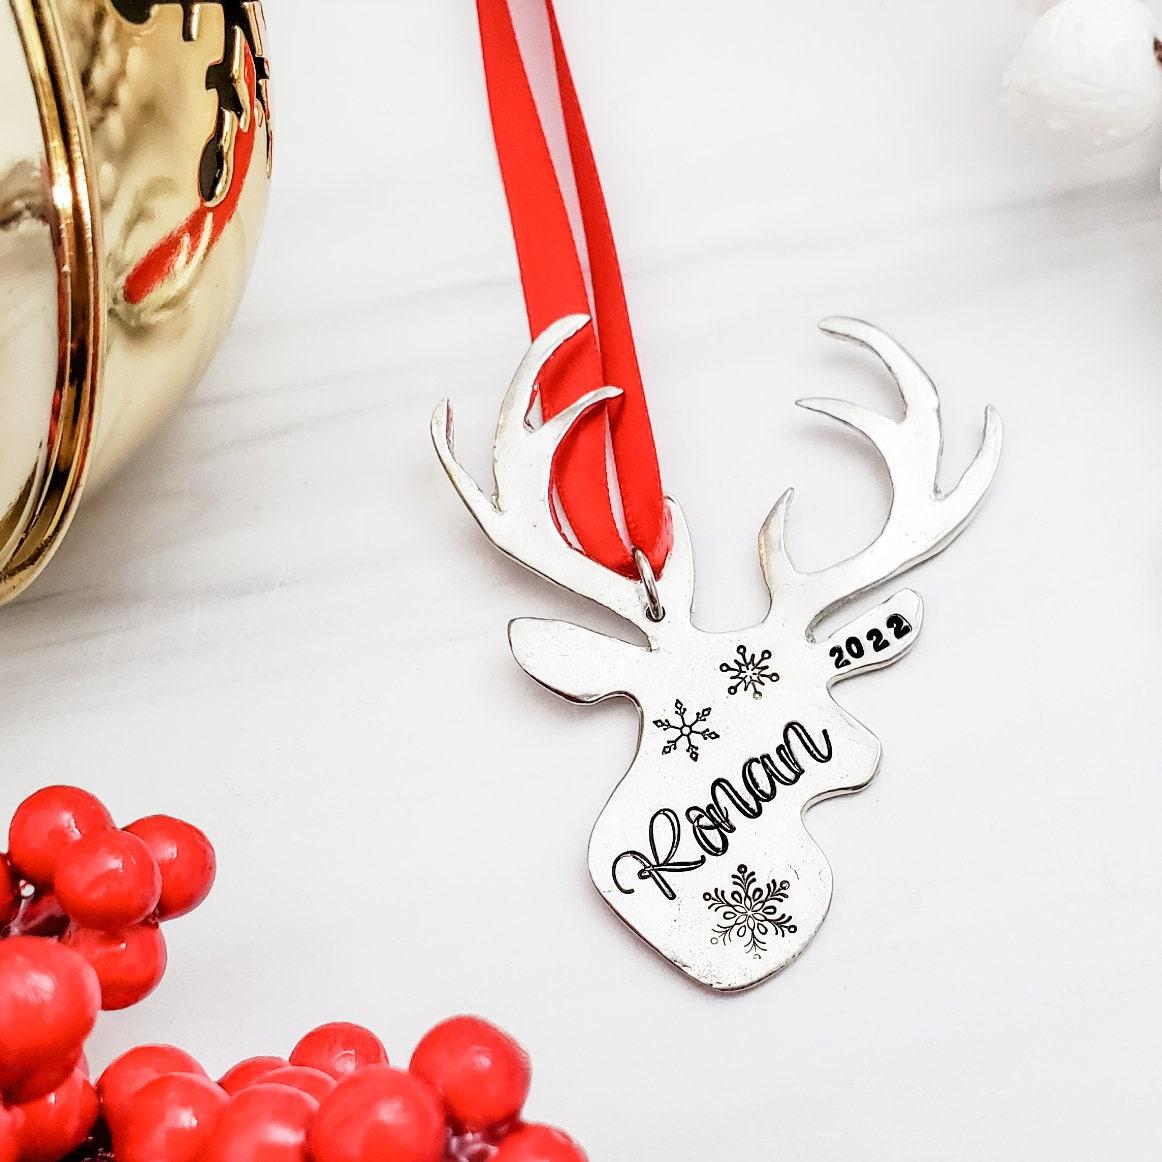 Personalized Child's Name Reindeer Ornament Salt and Sparkle